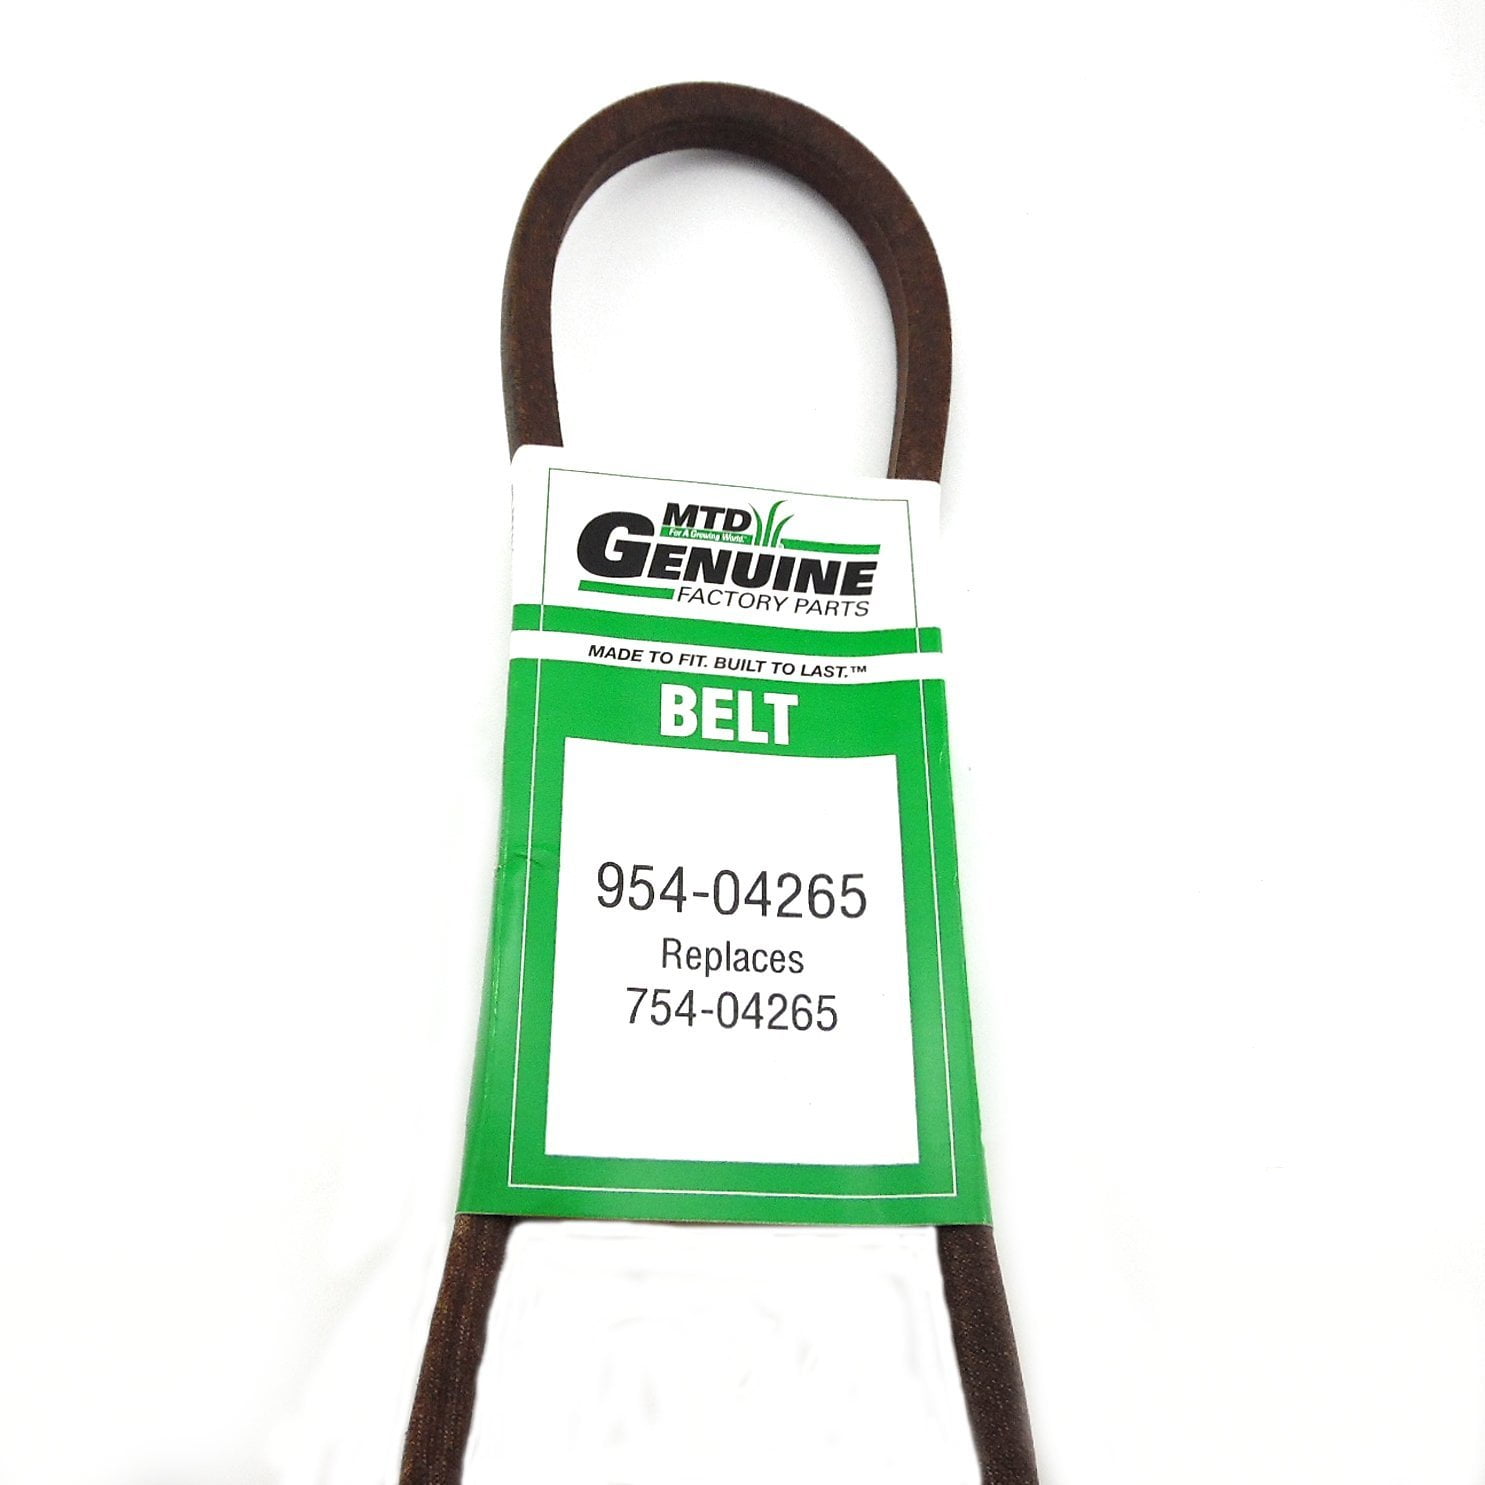 CRAFTSMAN 954-04265 made with Kevlar Replacement Belt 